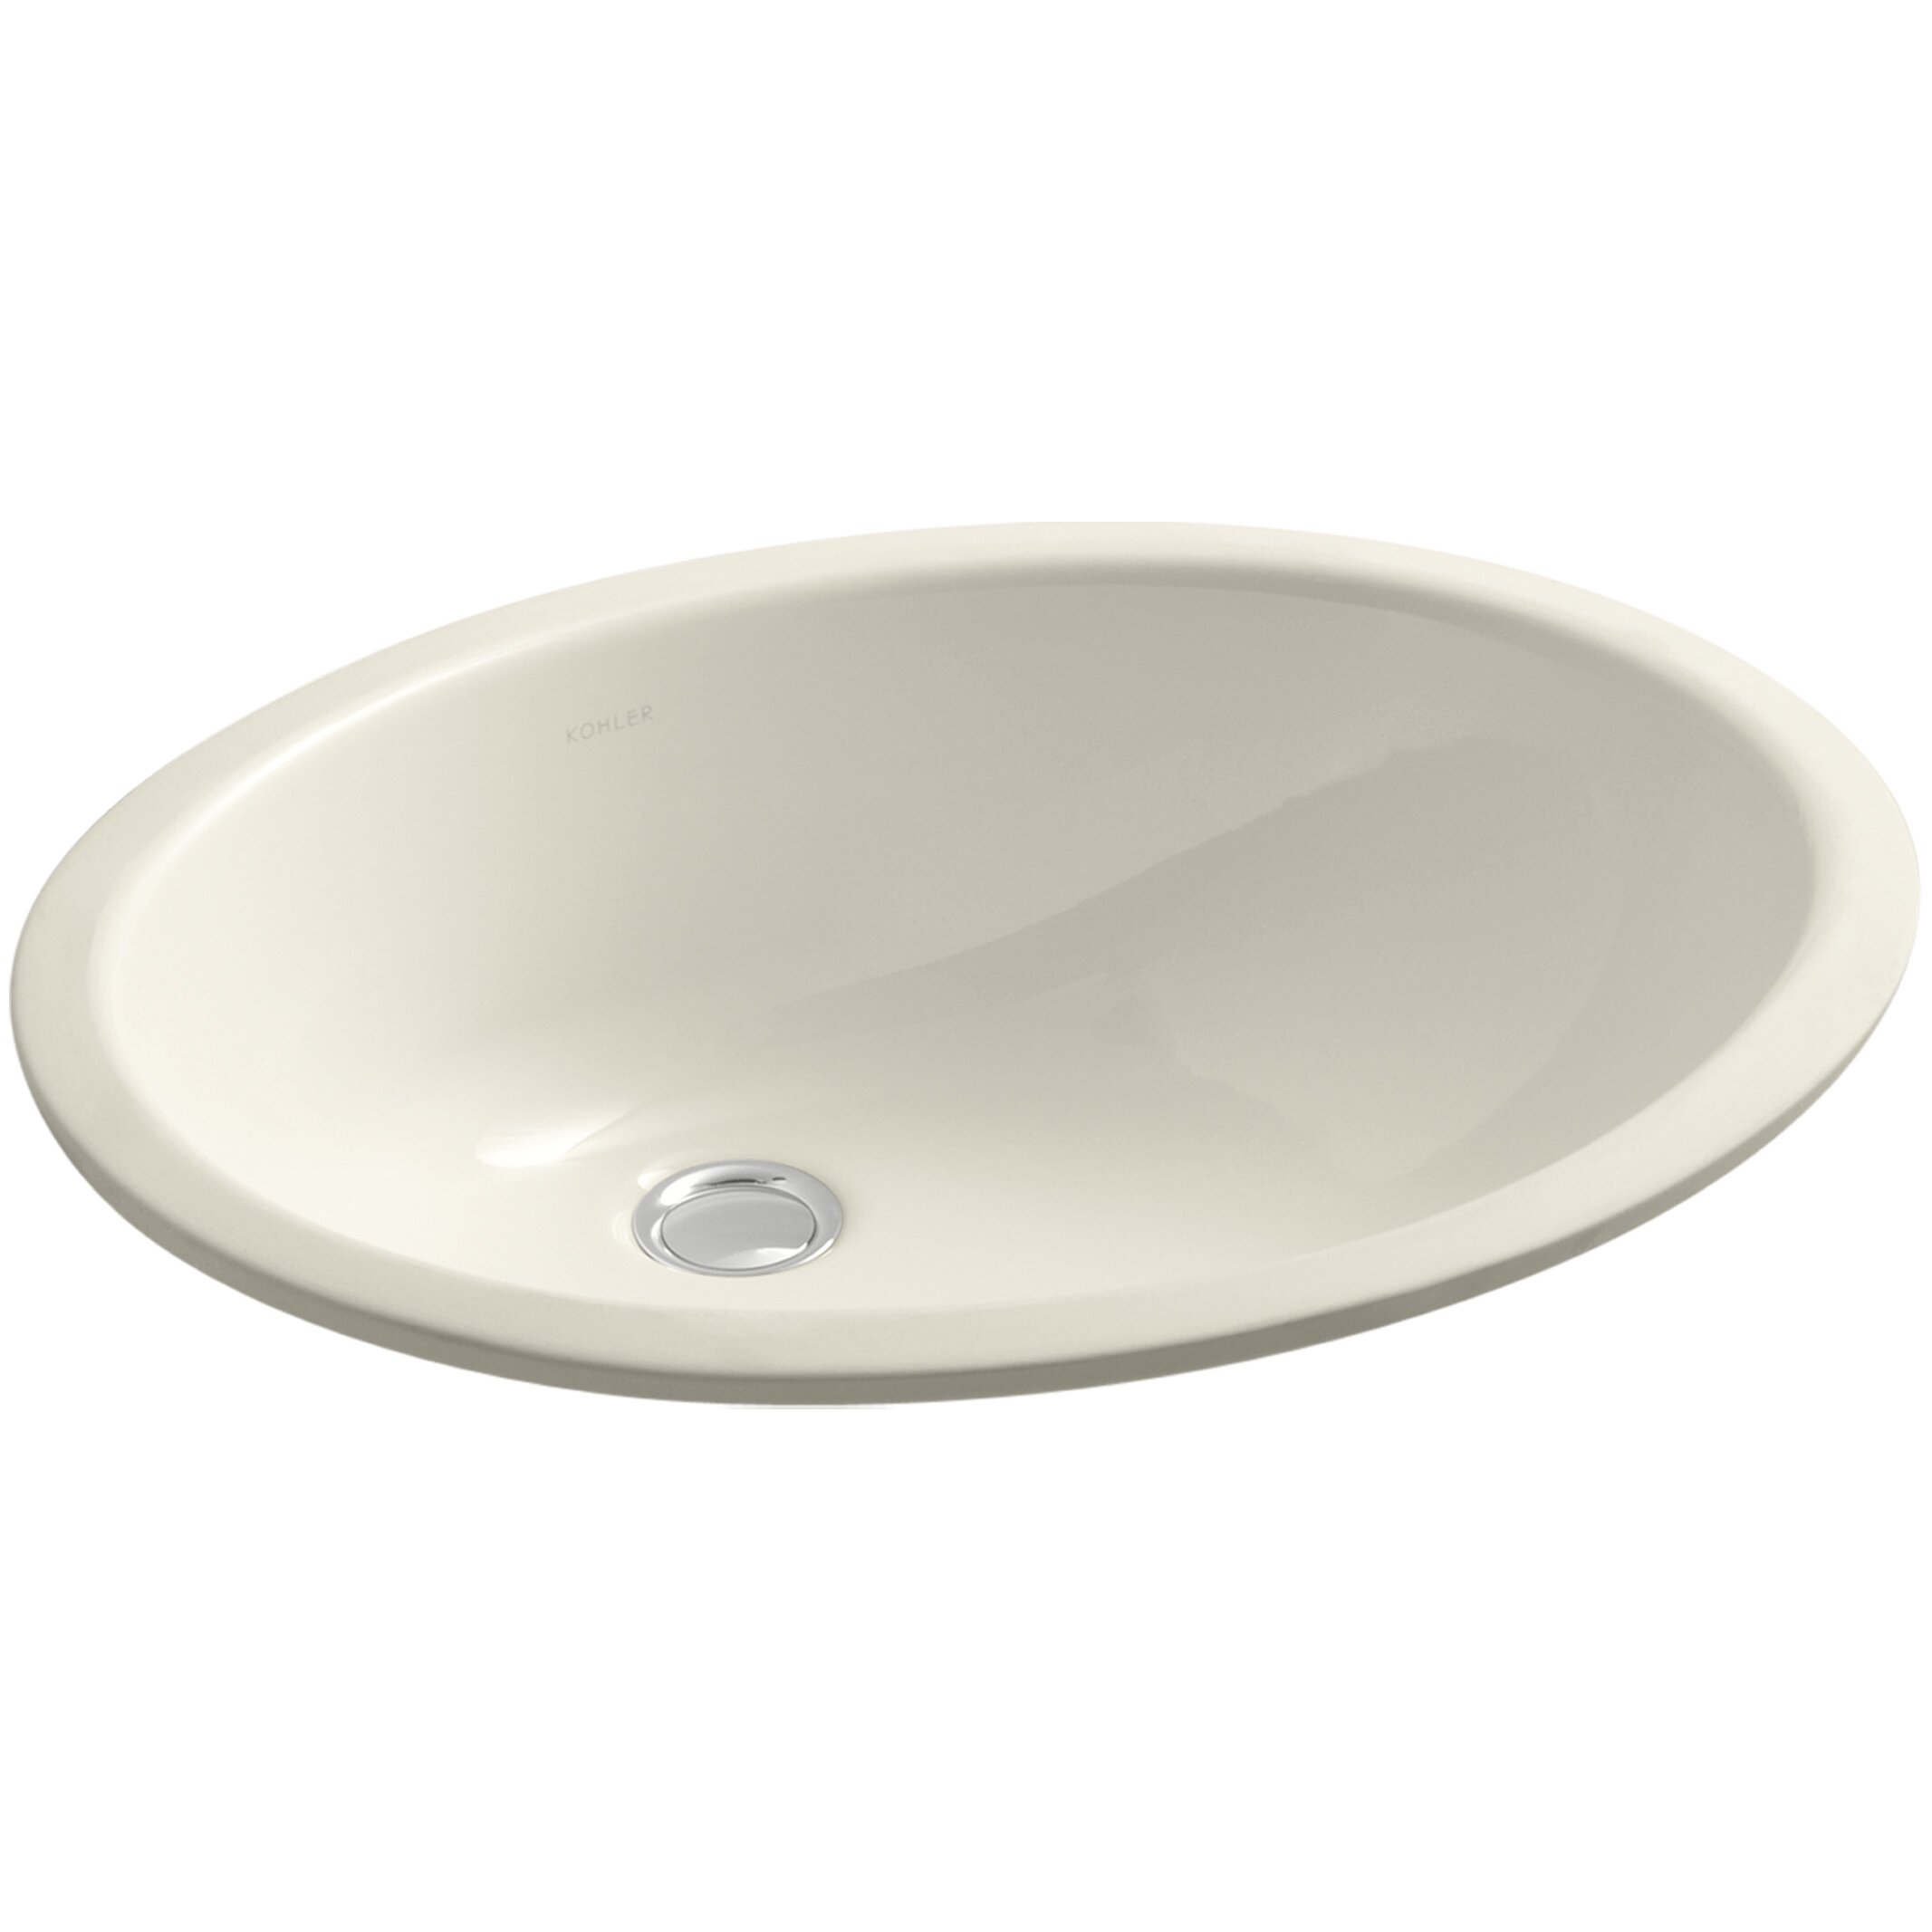 Caxton Undermount Bathroom Sink with Overflow and Clamp Assembly by ...